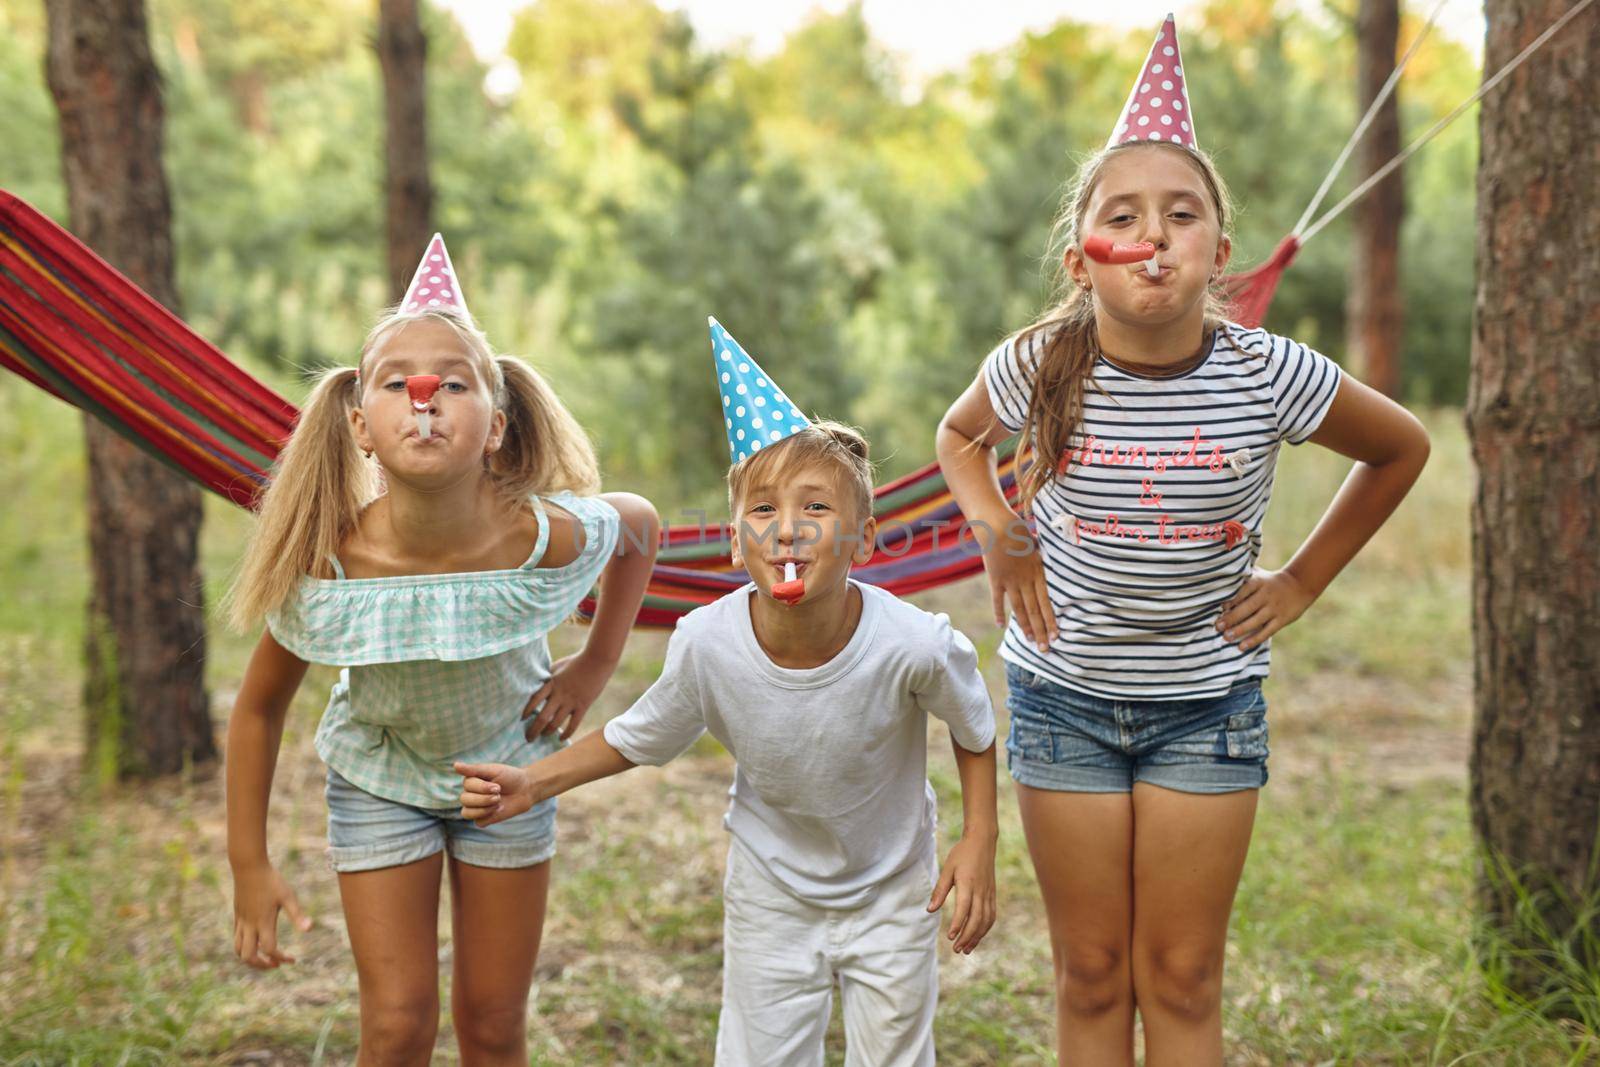 birthday, childhood and celebration concept - happy kids blowing party horns by InnaVlasova